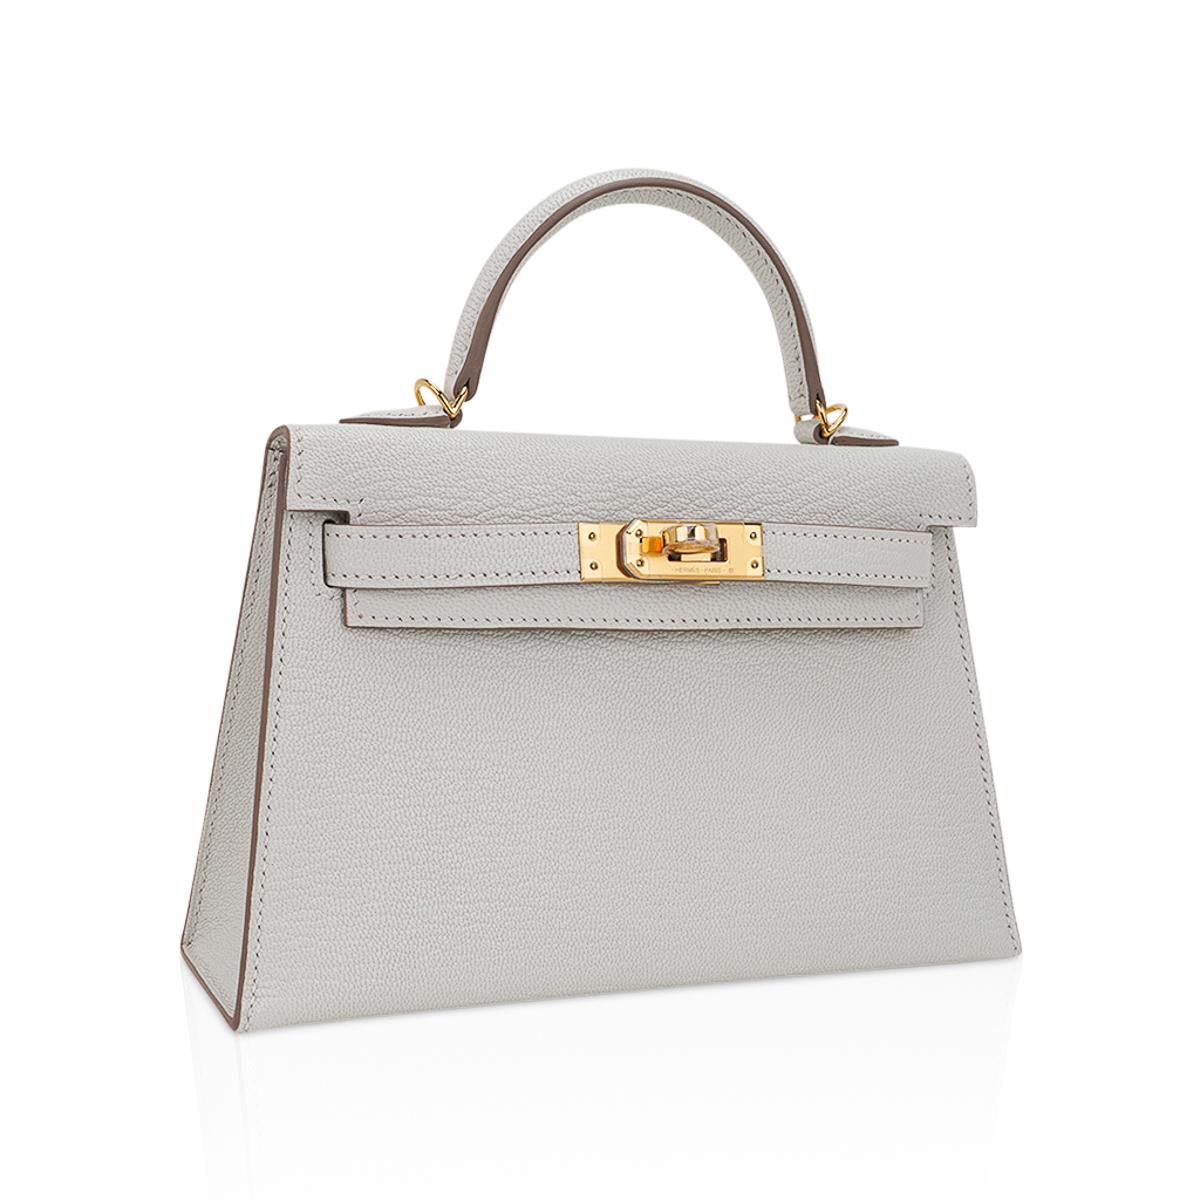 Mightychic offers an Hermes Kelly 20 mini Sellier bag featured in Mushroom.
This stunning neutral colour is soft as a cloud.
An elegant color for year round wear.
Chevre leather accentuated with lush with Gold hardware.
Comes with signature Hermes